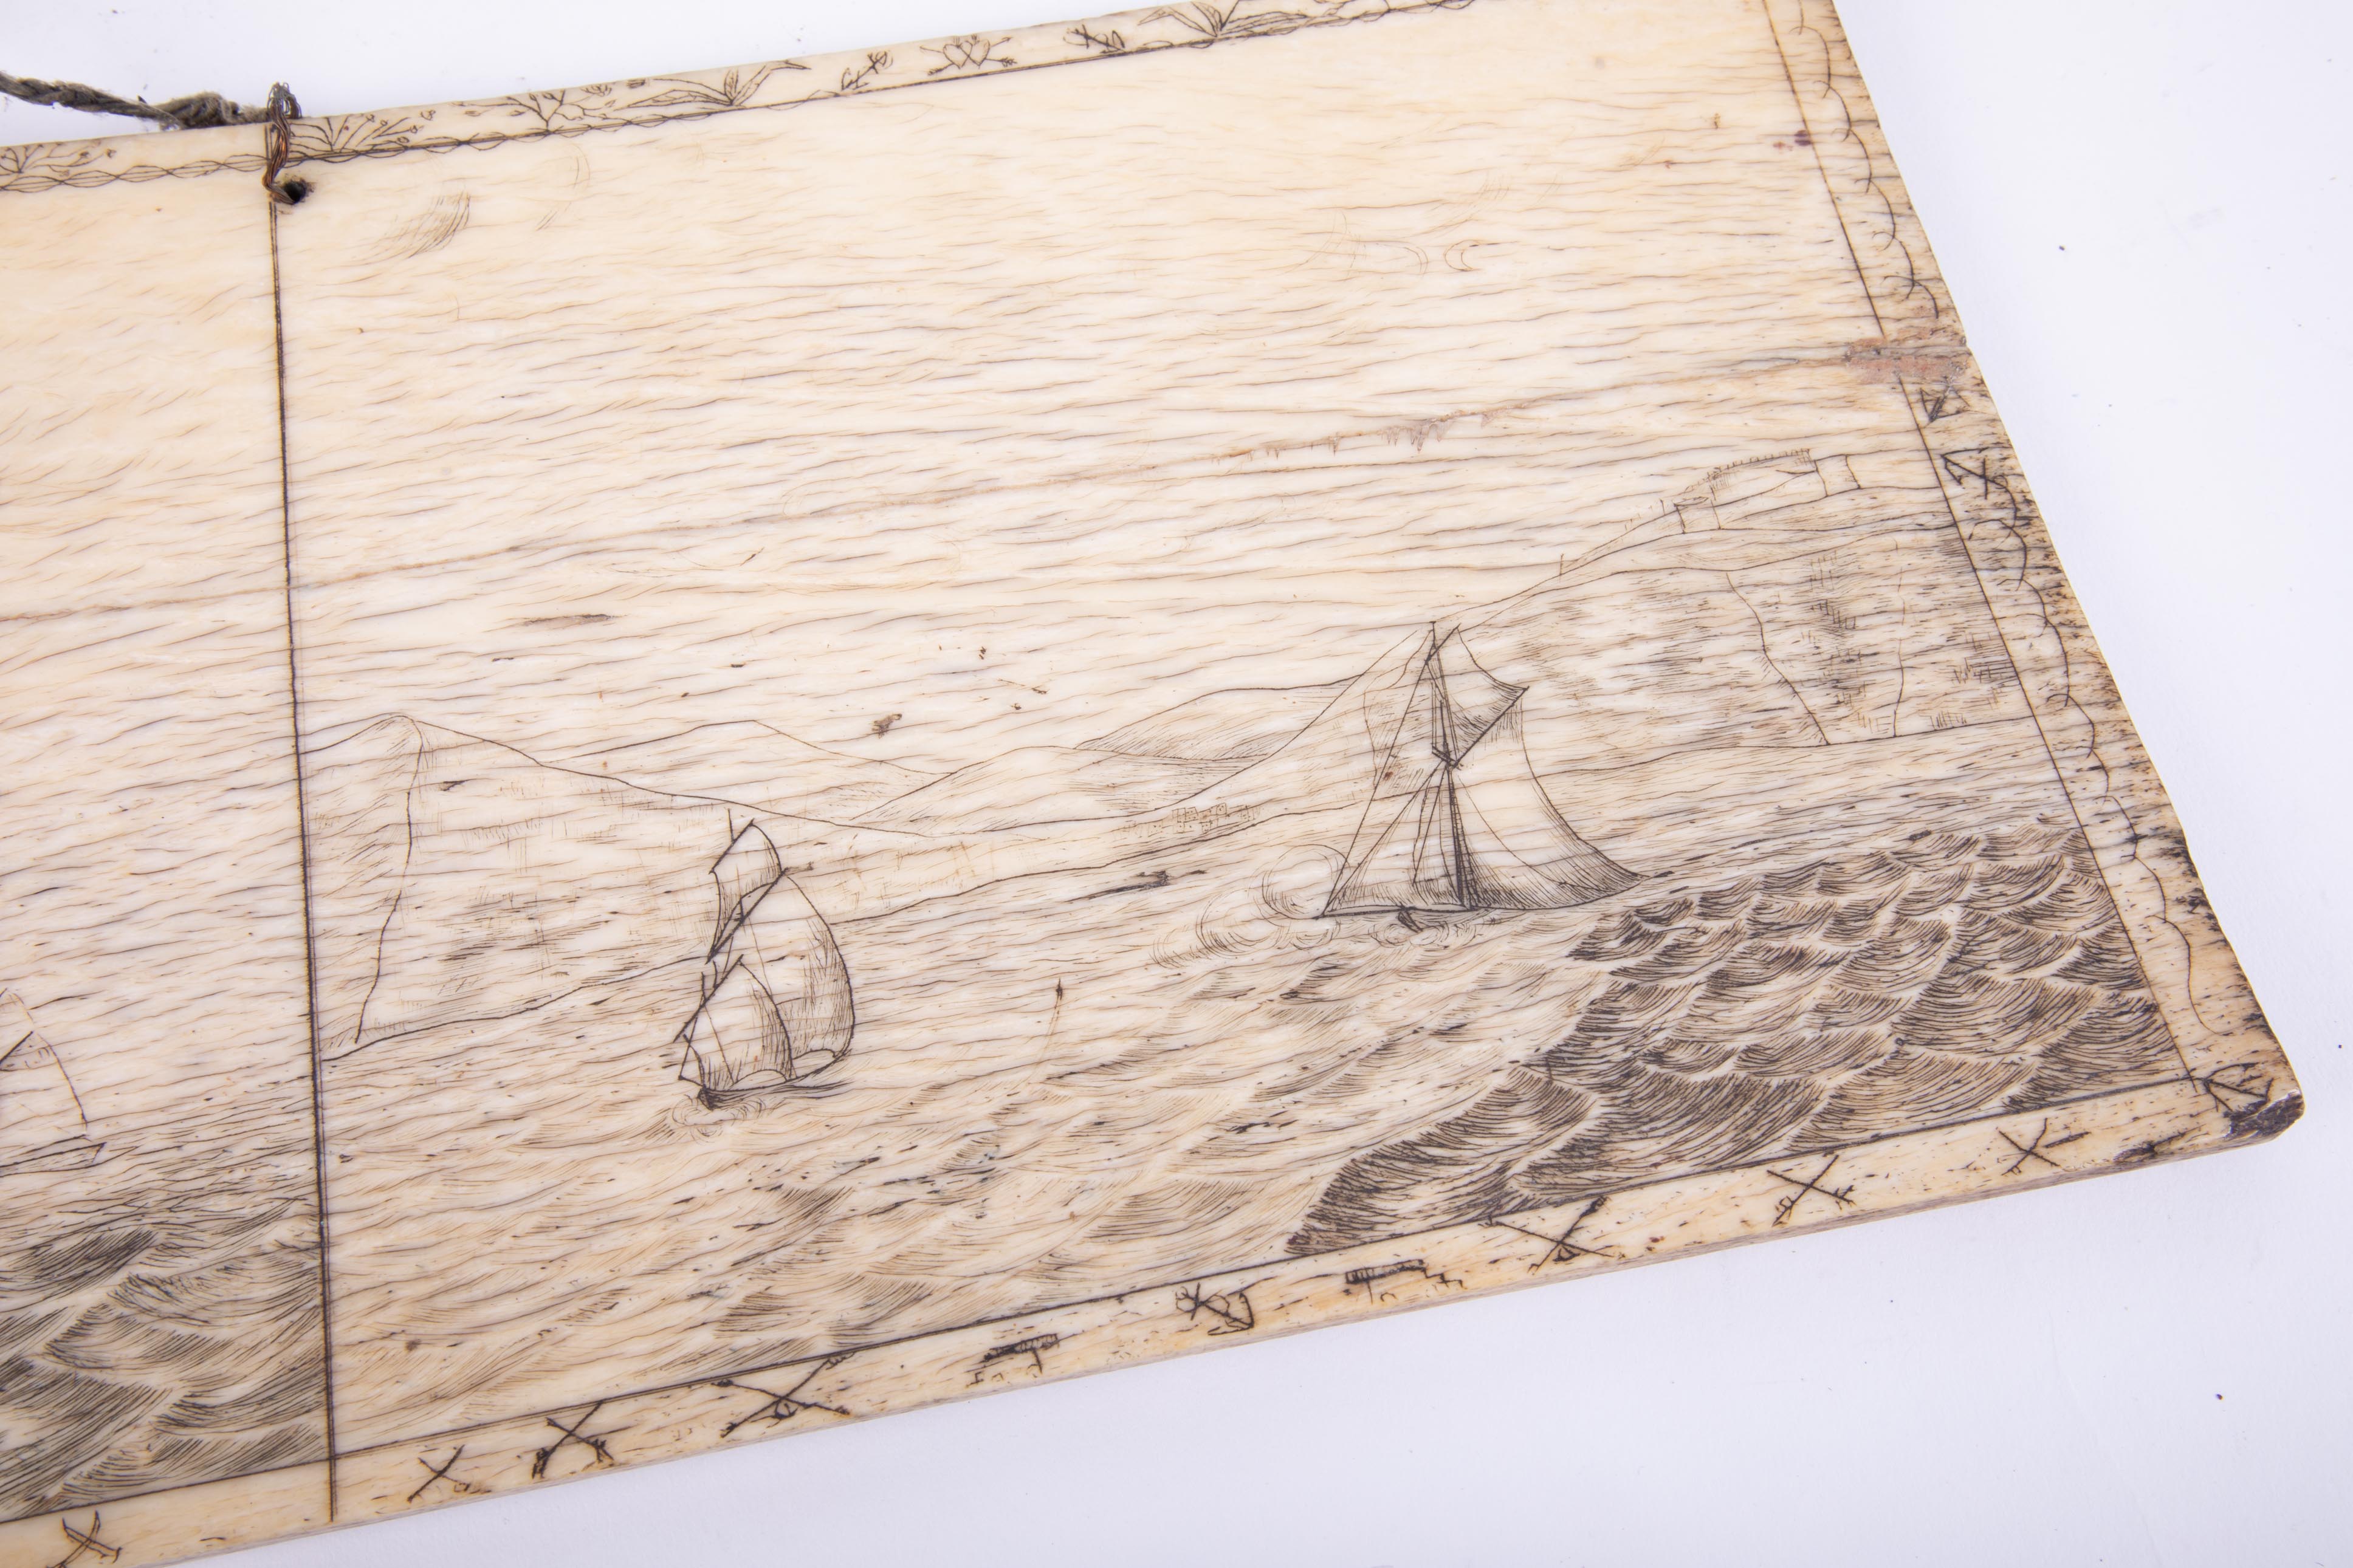 A 19th century Sailors Scrimshaw bone panel, whale bone, decorated with a scene of sailing ships off - Image 6 of 7